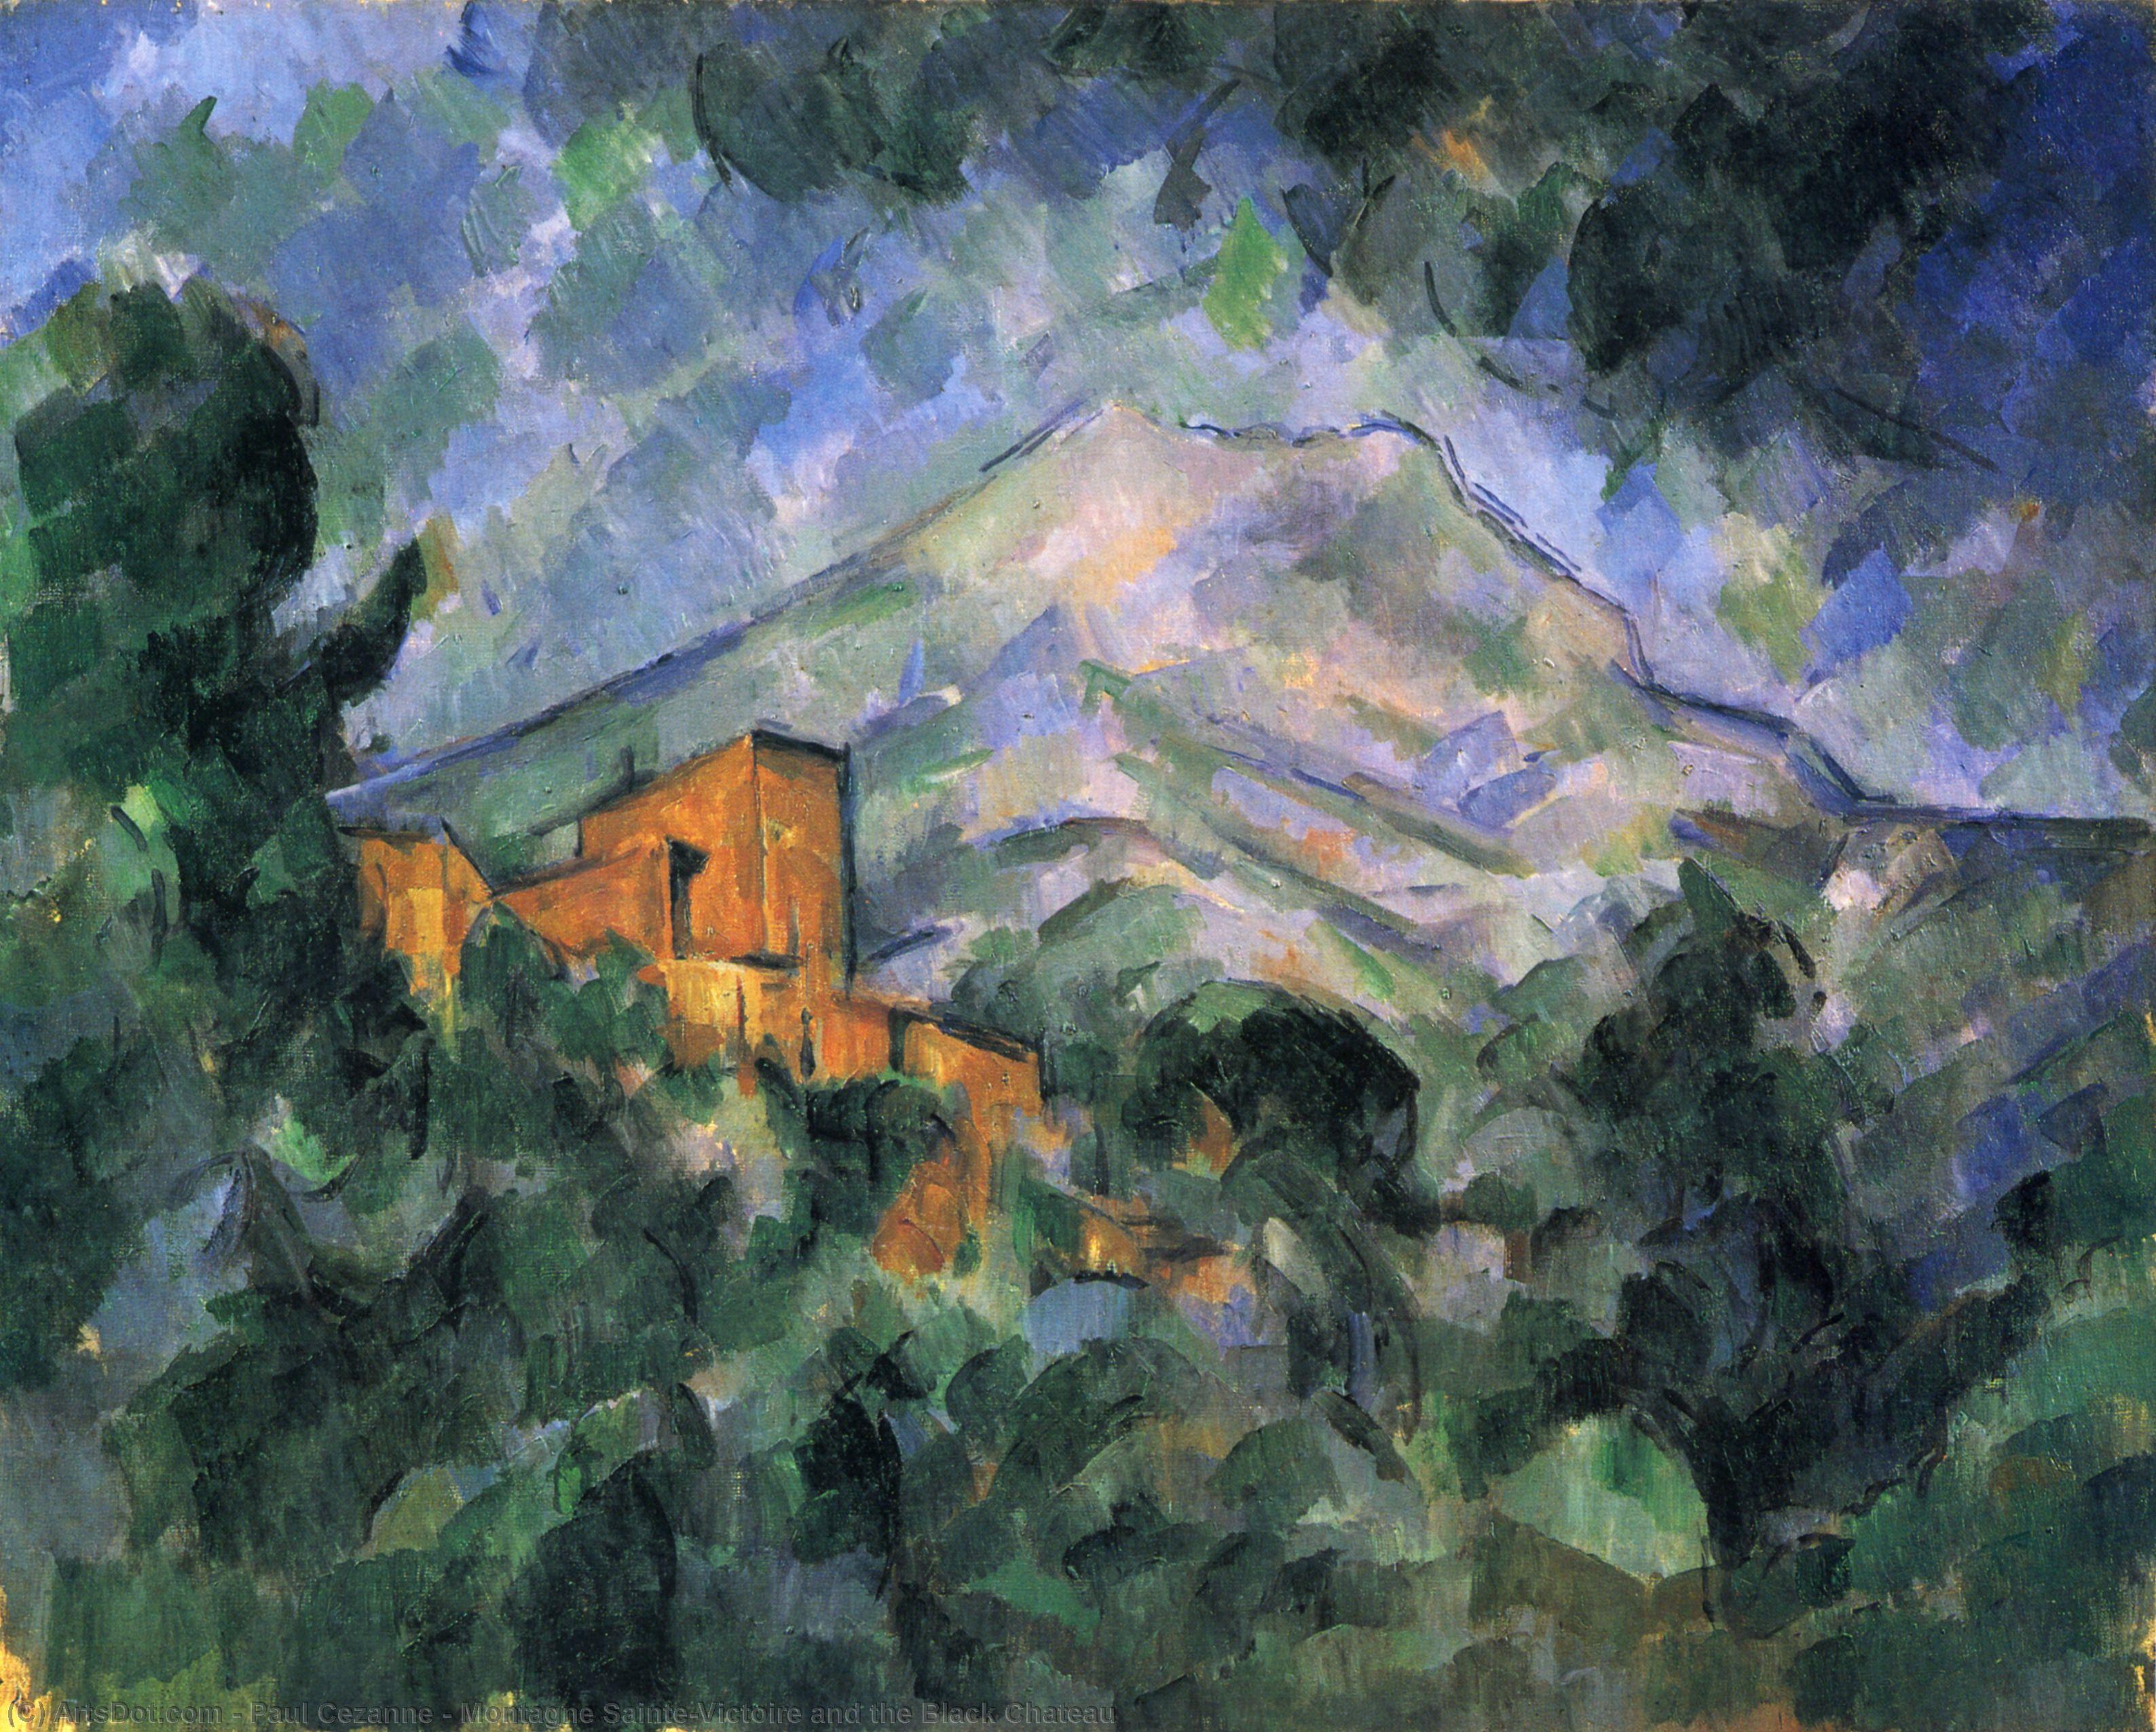 WikiOO.org - Encyclopedia of Fine Arts - Maalaus, taideteos Paul Cezanne - Montagne Sainte-Victoire and the Black Chateau